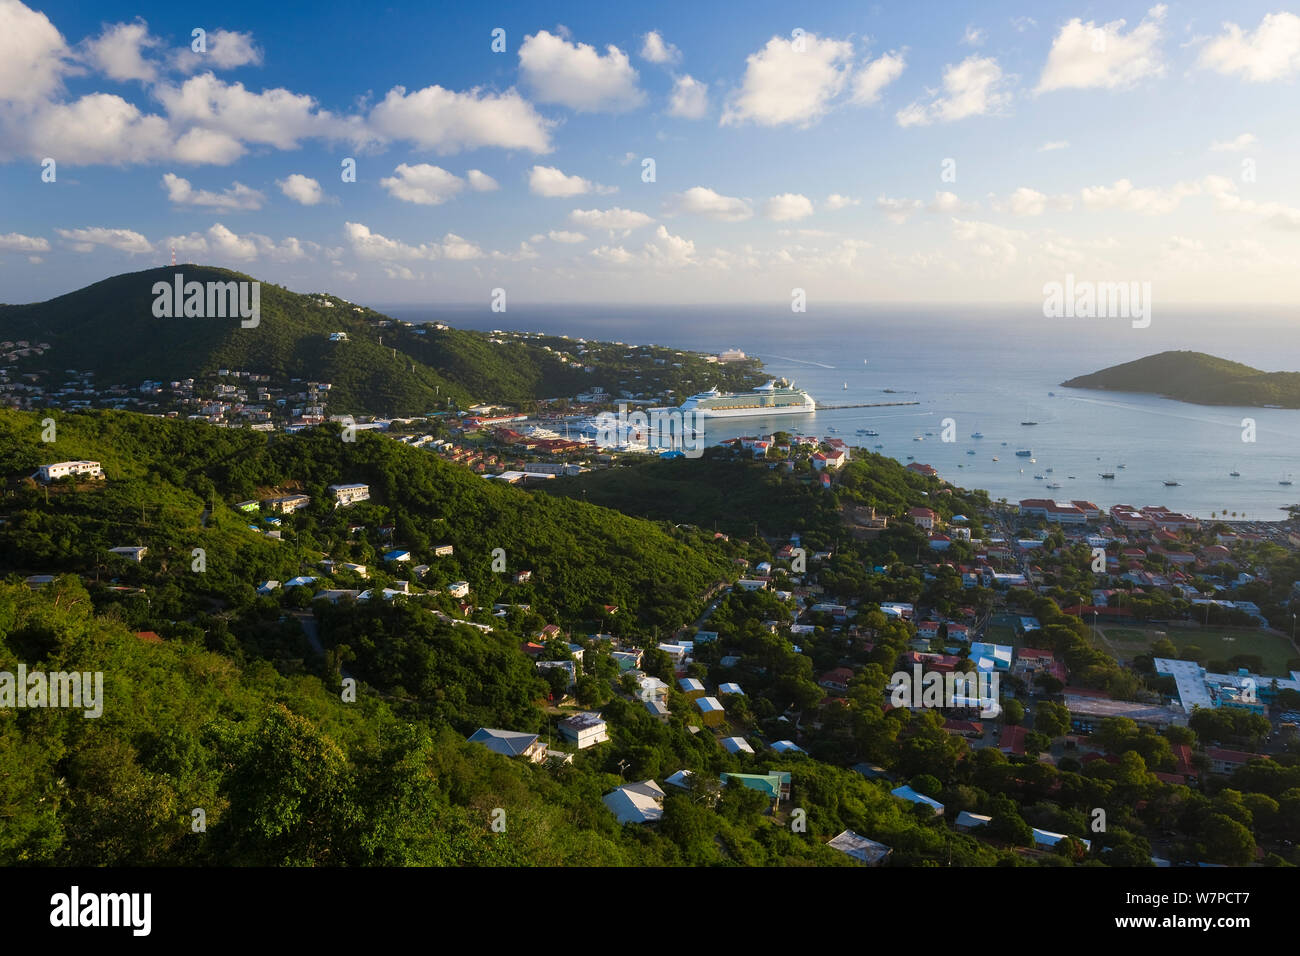 Elevated view over Charlotte Amalie and the Cruise Ship dock of Havensight, St Thomas, US Virgin Islands, Leeward Islands, Lesser Antilles, Caribbean, West Indies 2008 Stock Photo